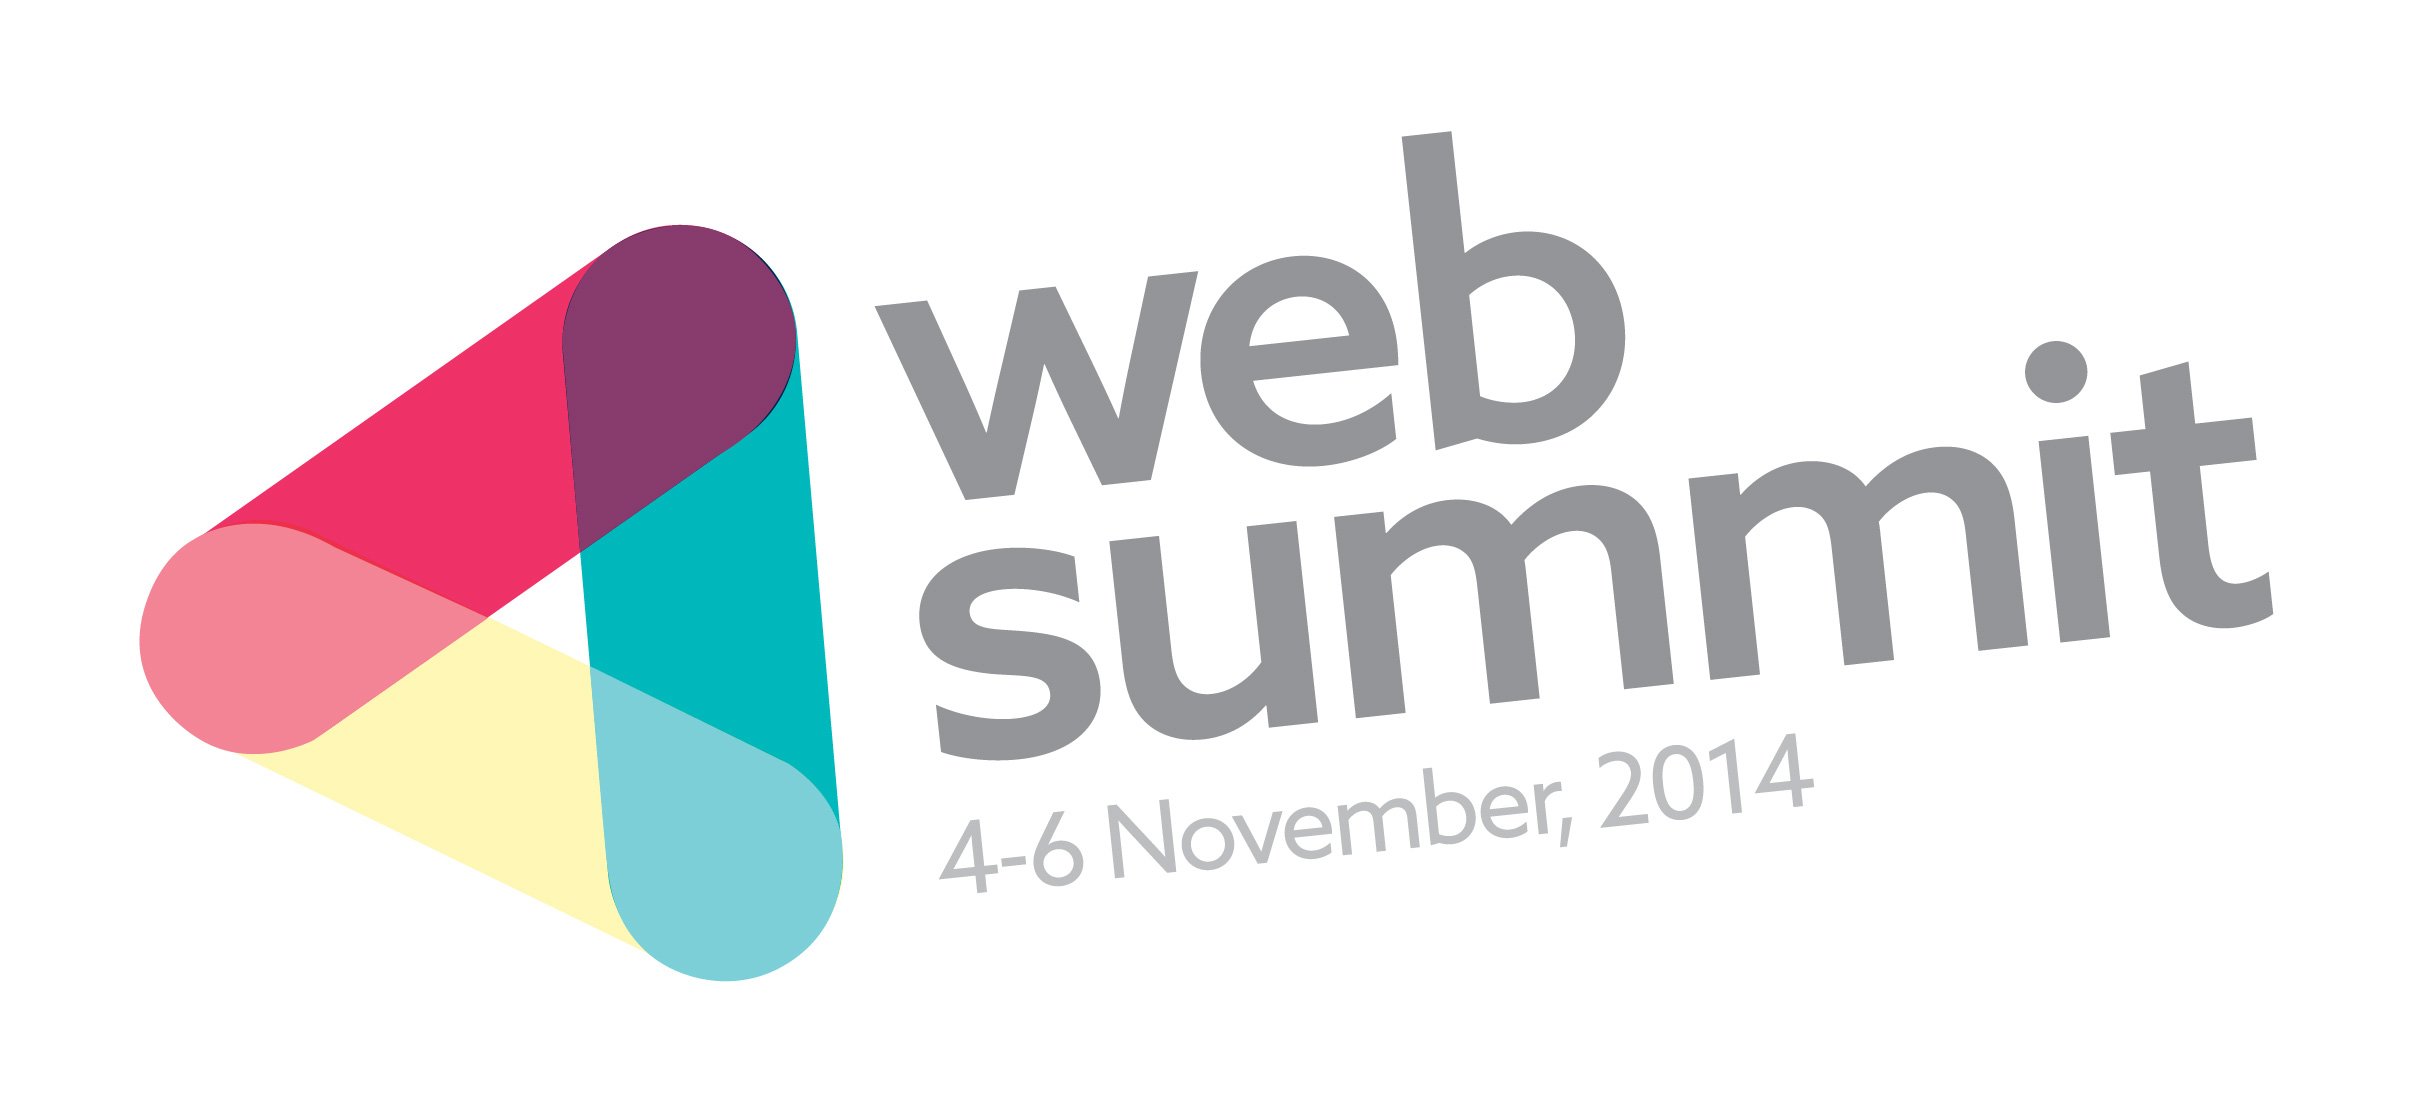 Online Accounting Software At Web Summit 2014